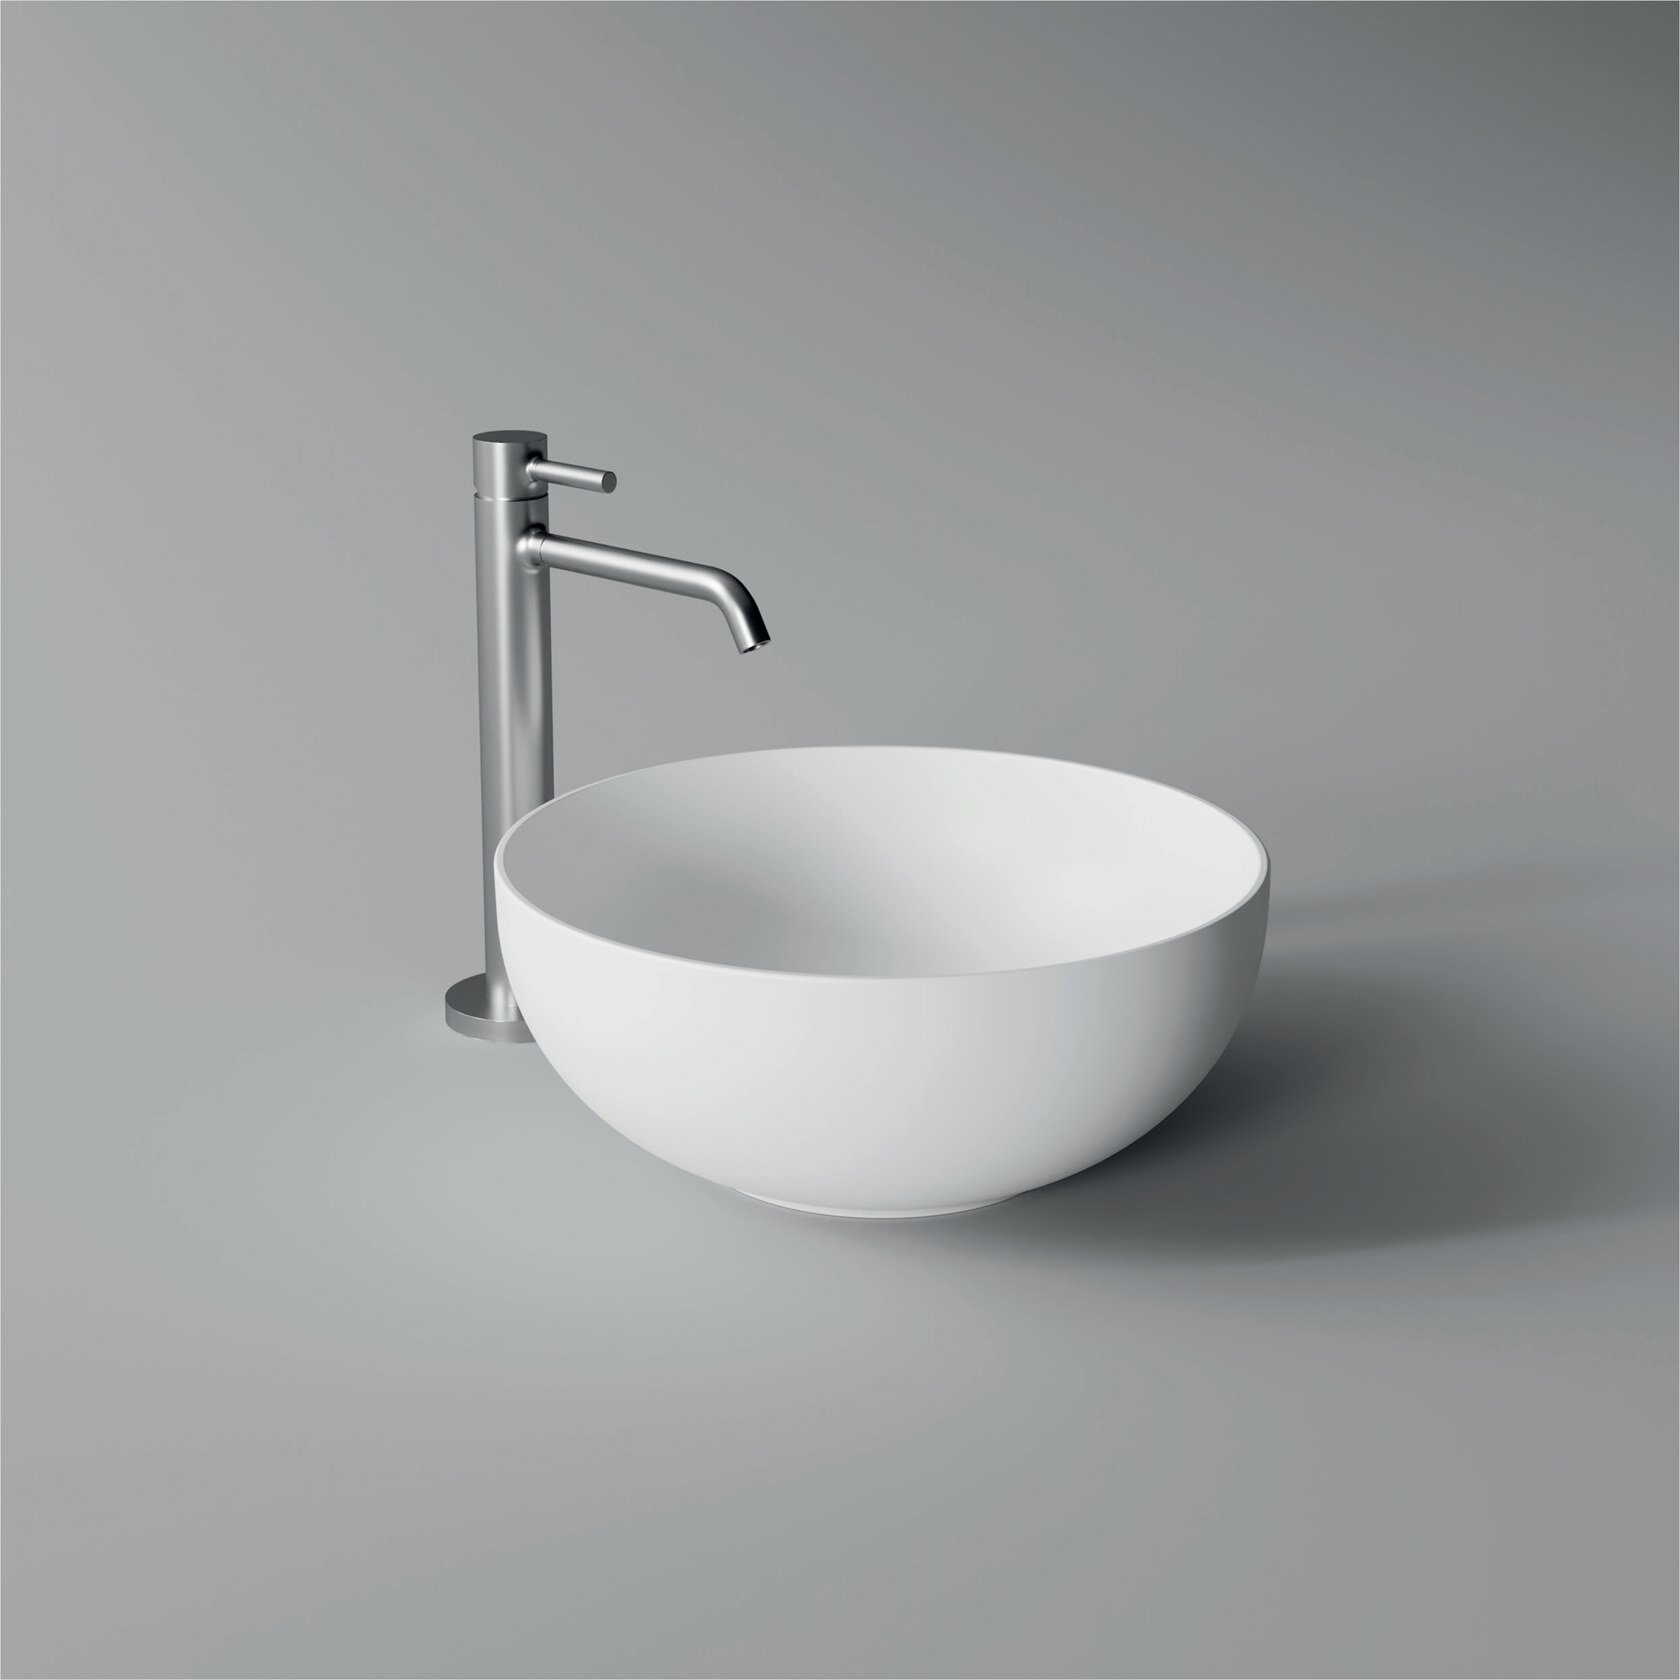 2b_FORM-Round-washbasin-Alice-Ceramica-364859-relb2a26945.png